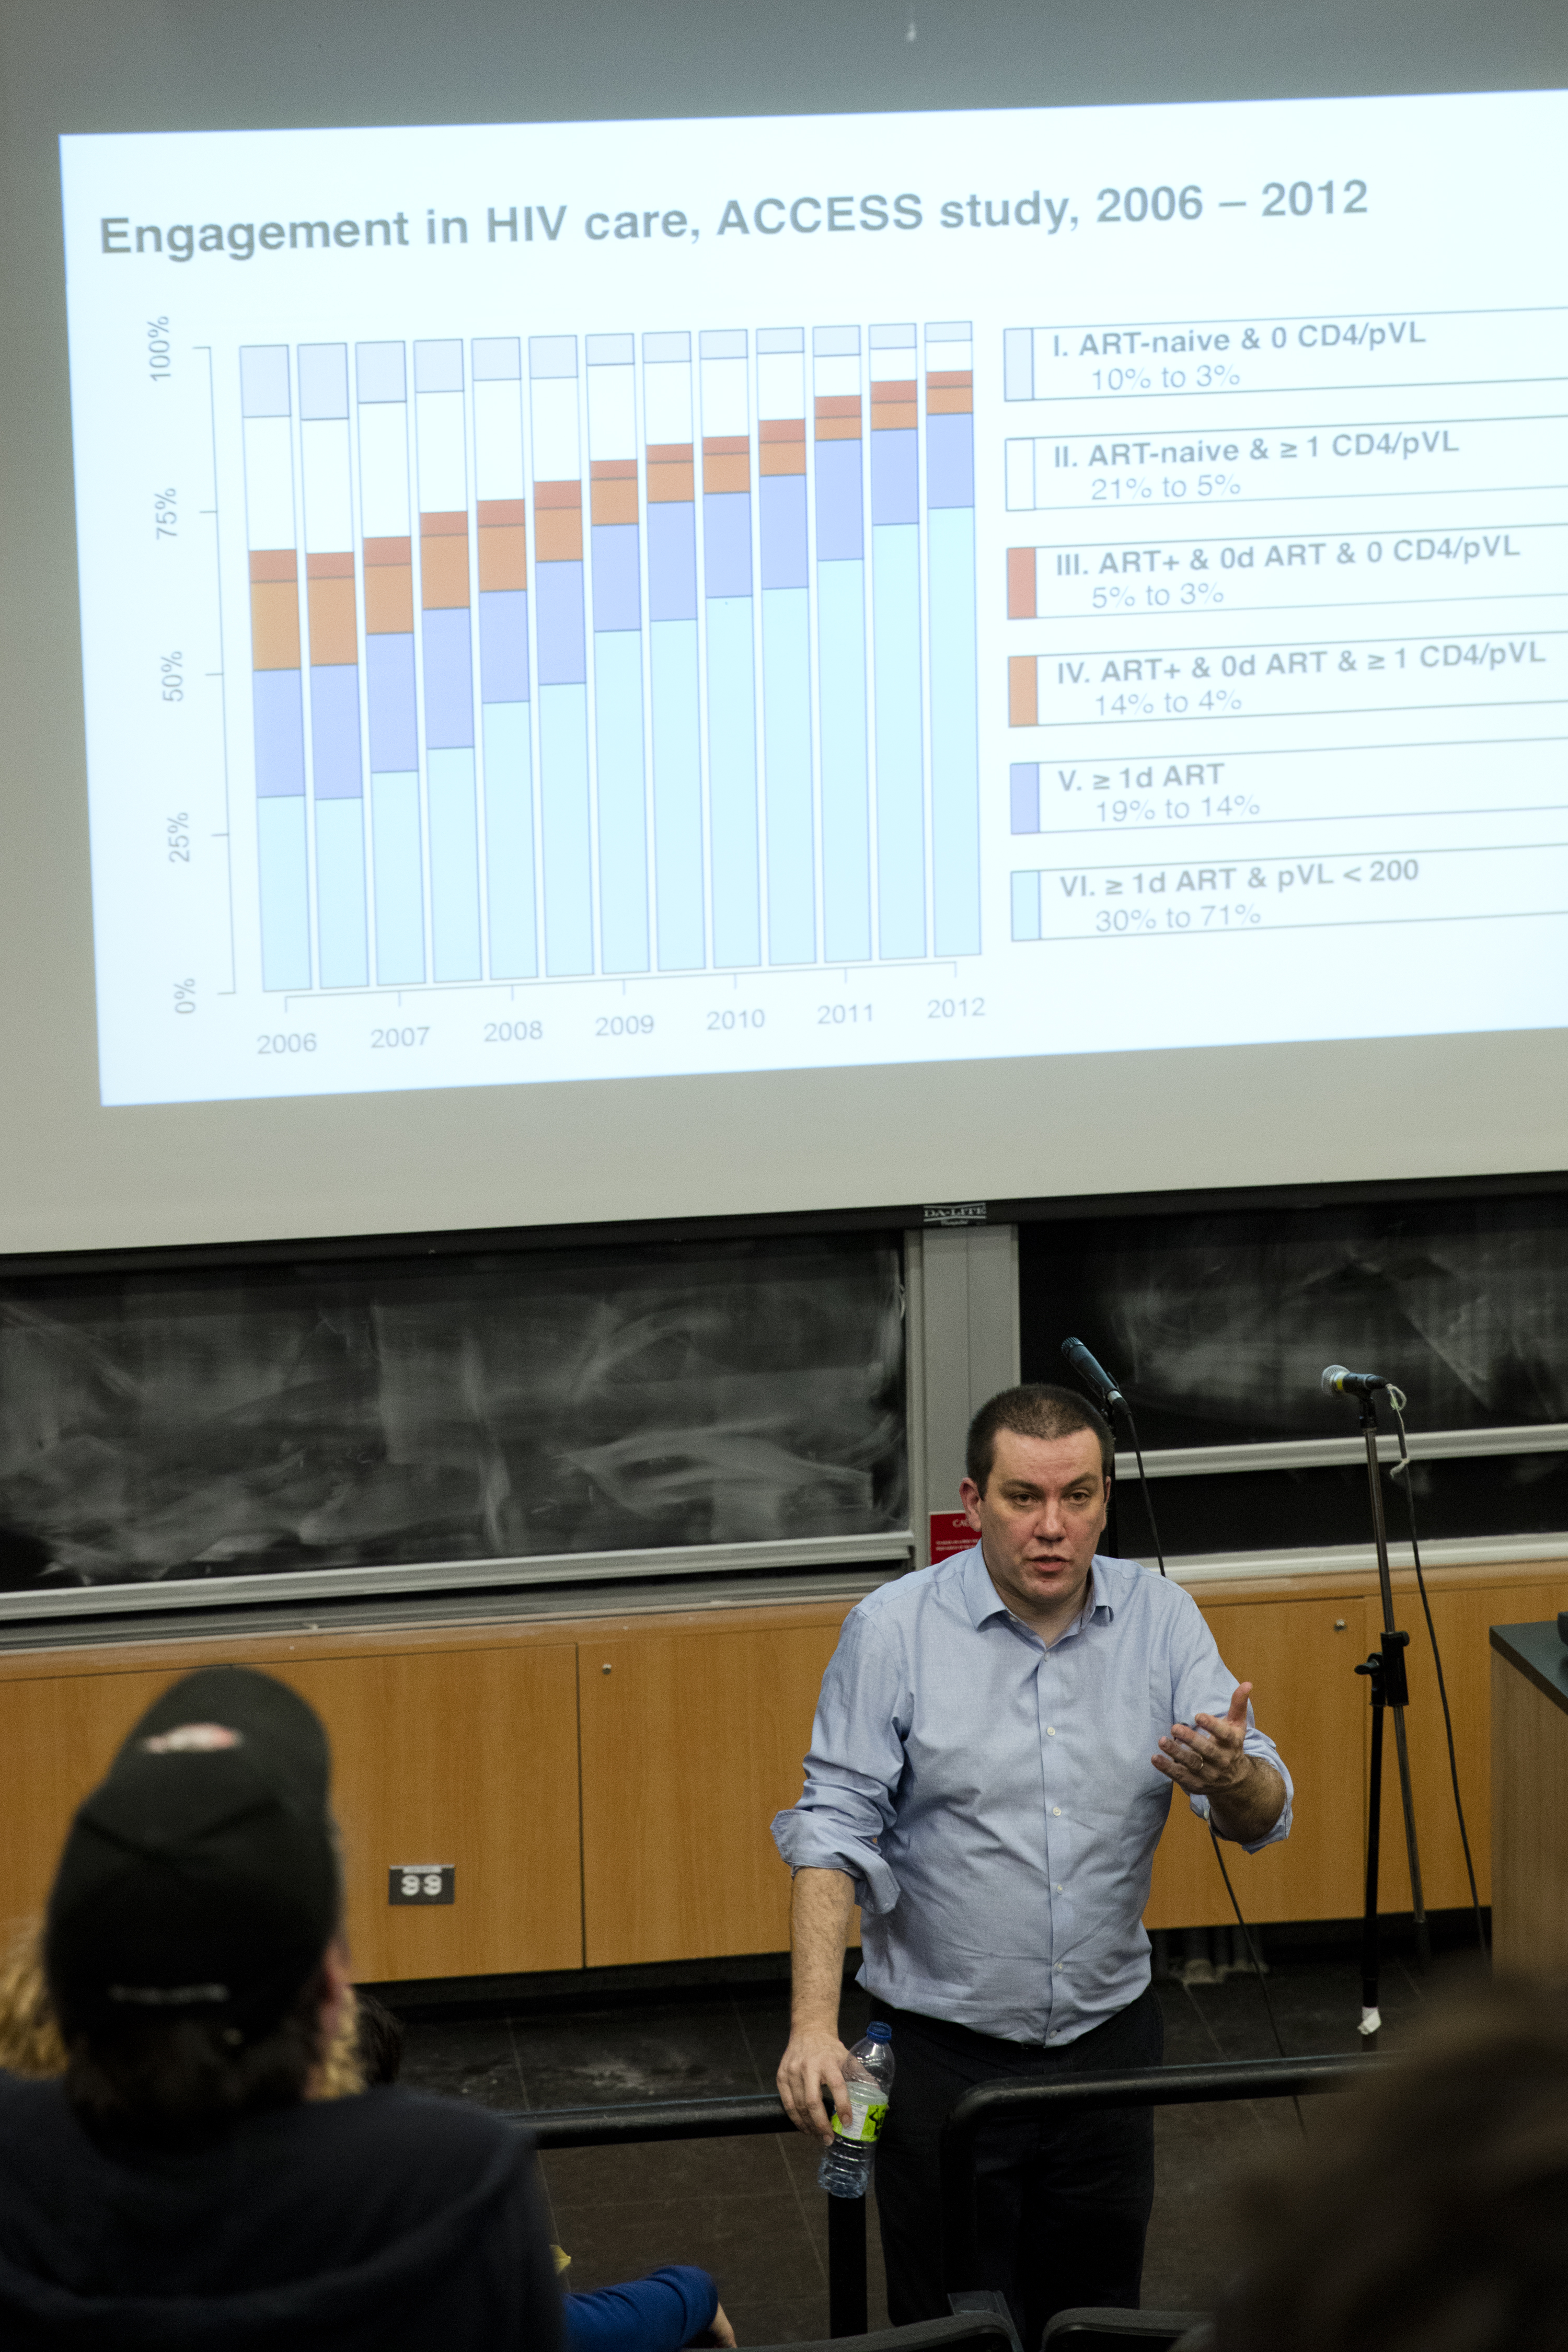 M.J. Milloy discusses ending HIV in the Leacock building at McGill University. Photo by Marie-Pierre Savard.